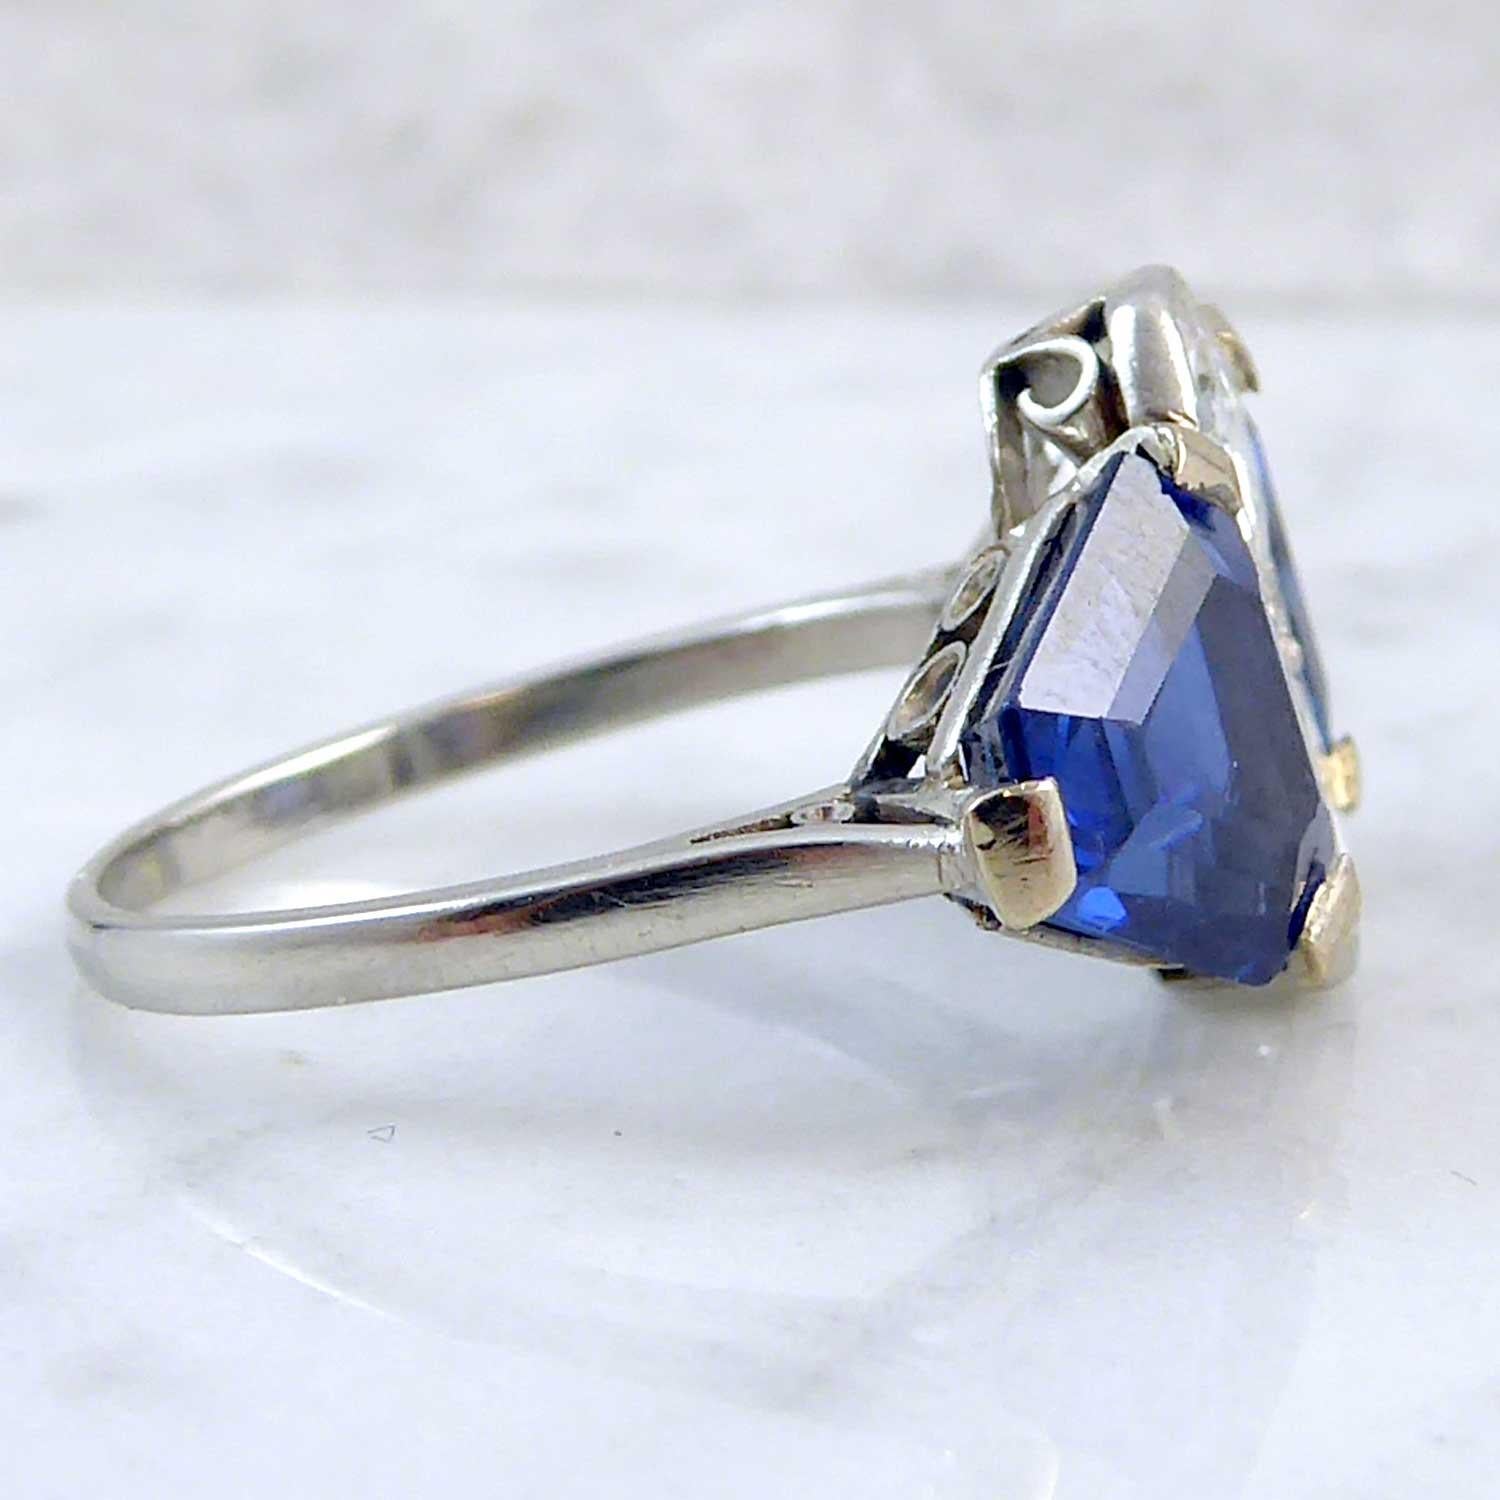 From the Art Deco era circa 1920's, this is a fabulous sapphire and diamond ring in a geometric 